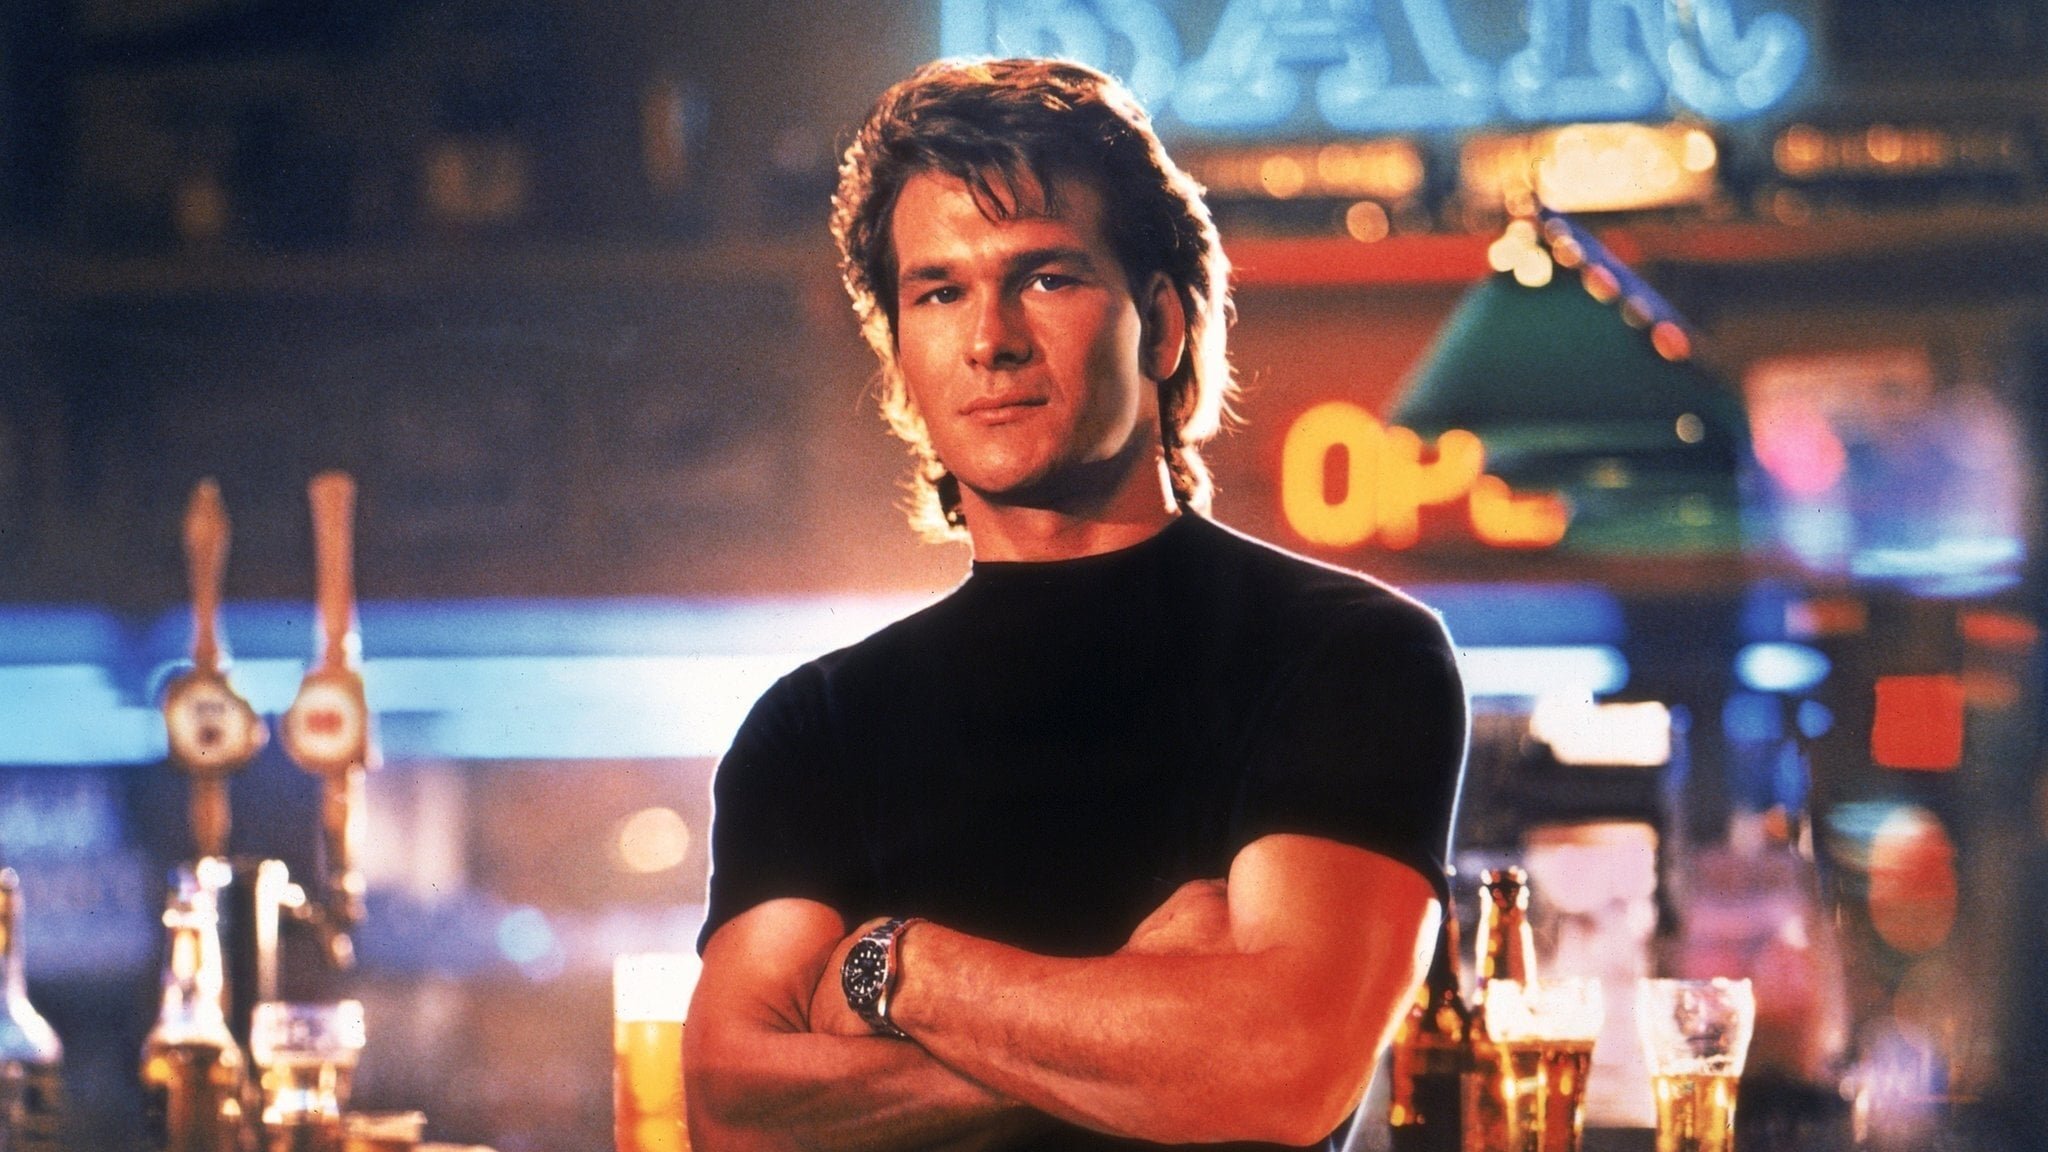 Worklife Lessons from Roadhouse — Wusops Book of Worklife Fables